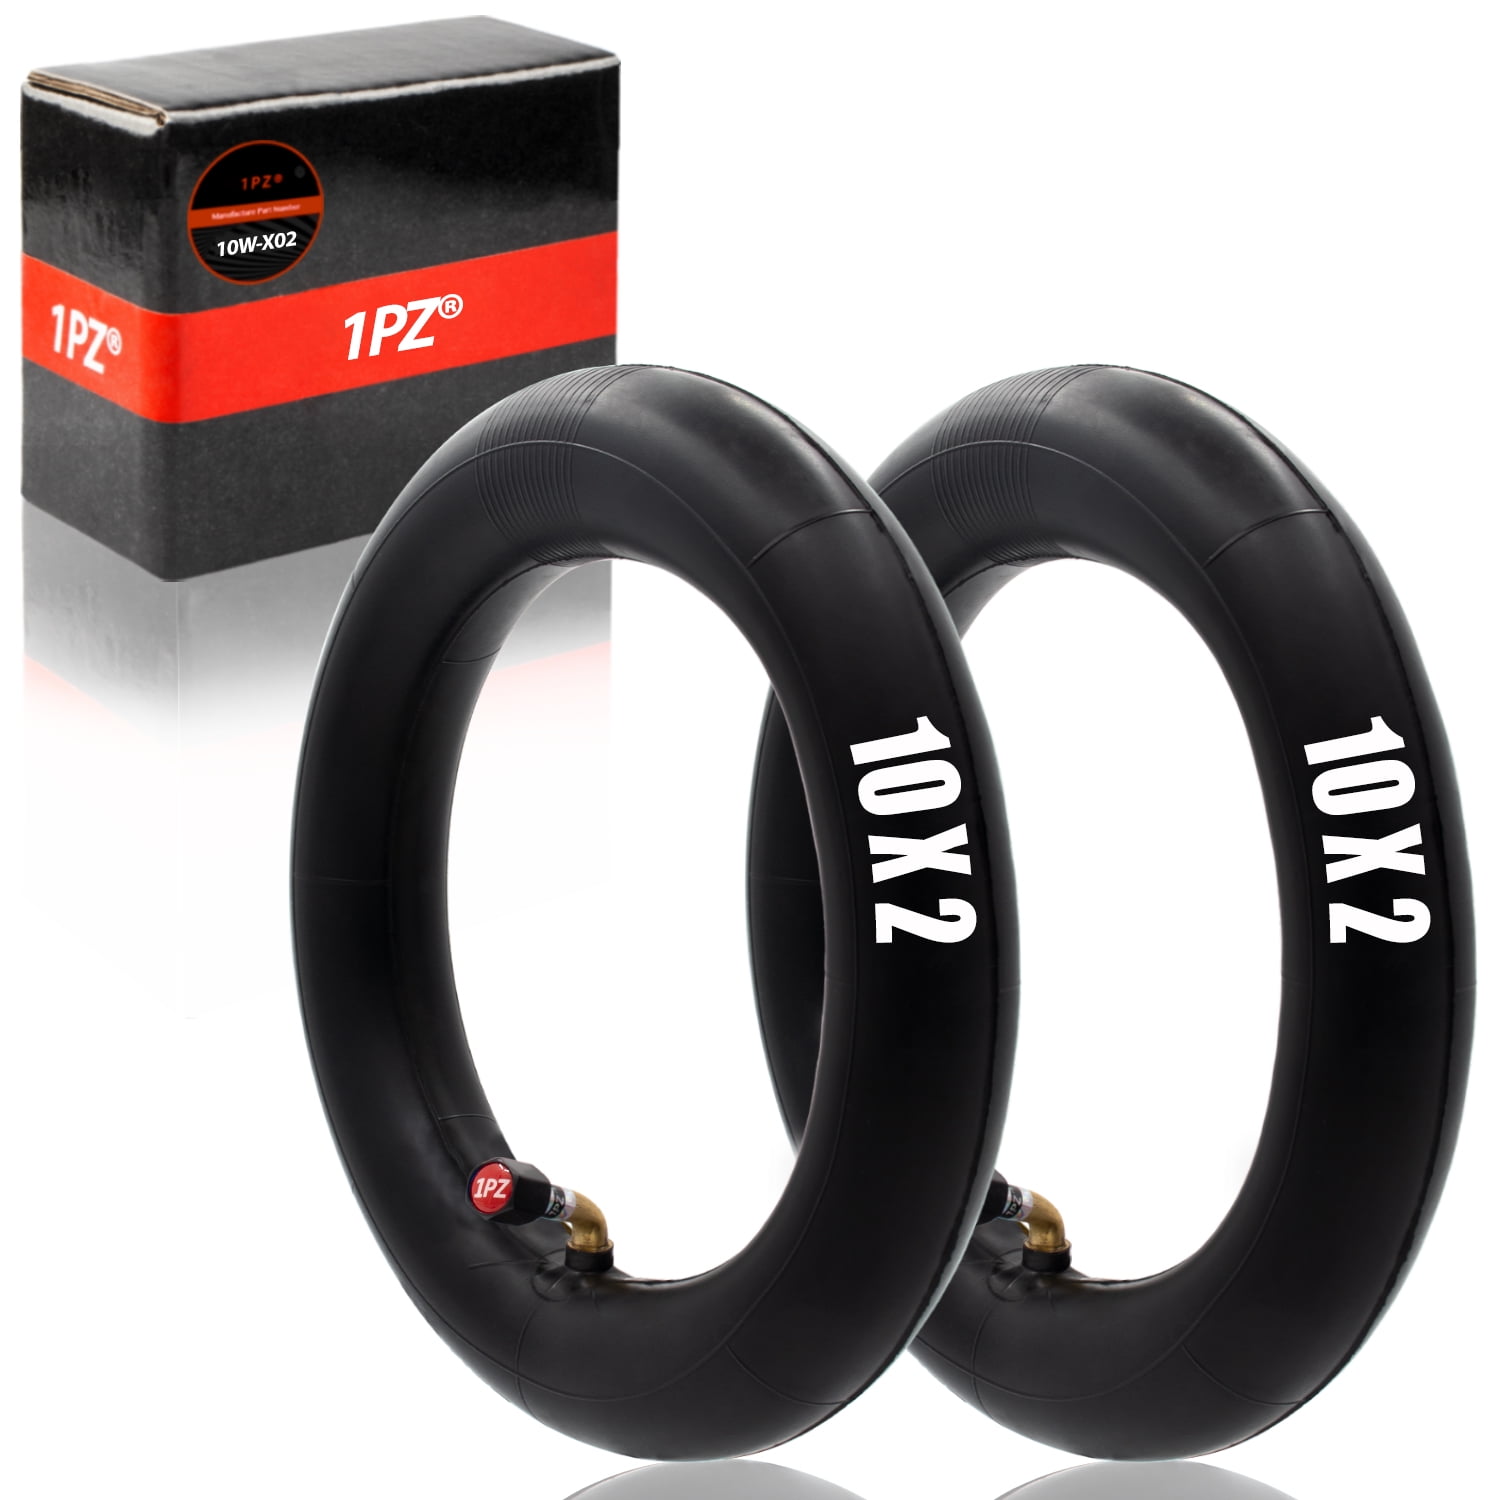 Details about   2 x 18" inch Bike Inner Tube 18 x 1.75-2.125 Bicycle Rubber Tire Interior BMX 